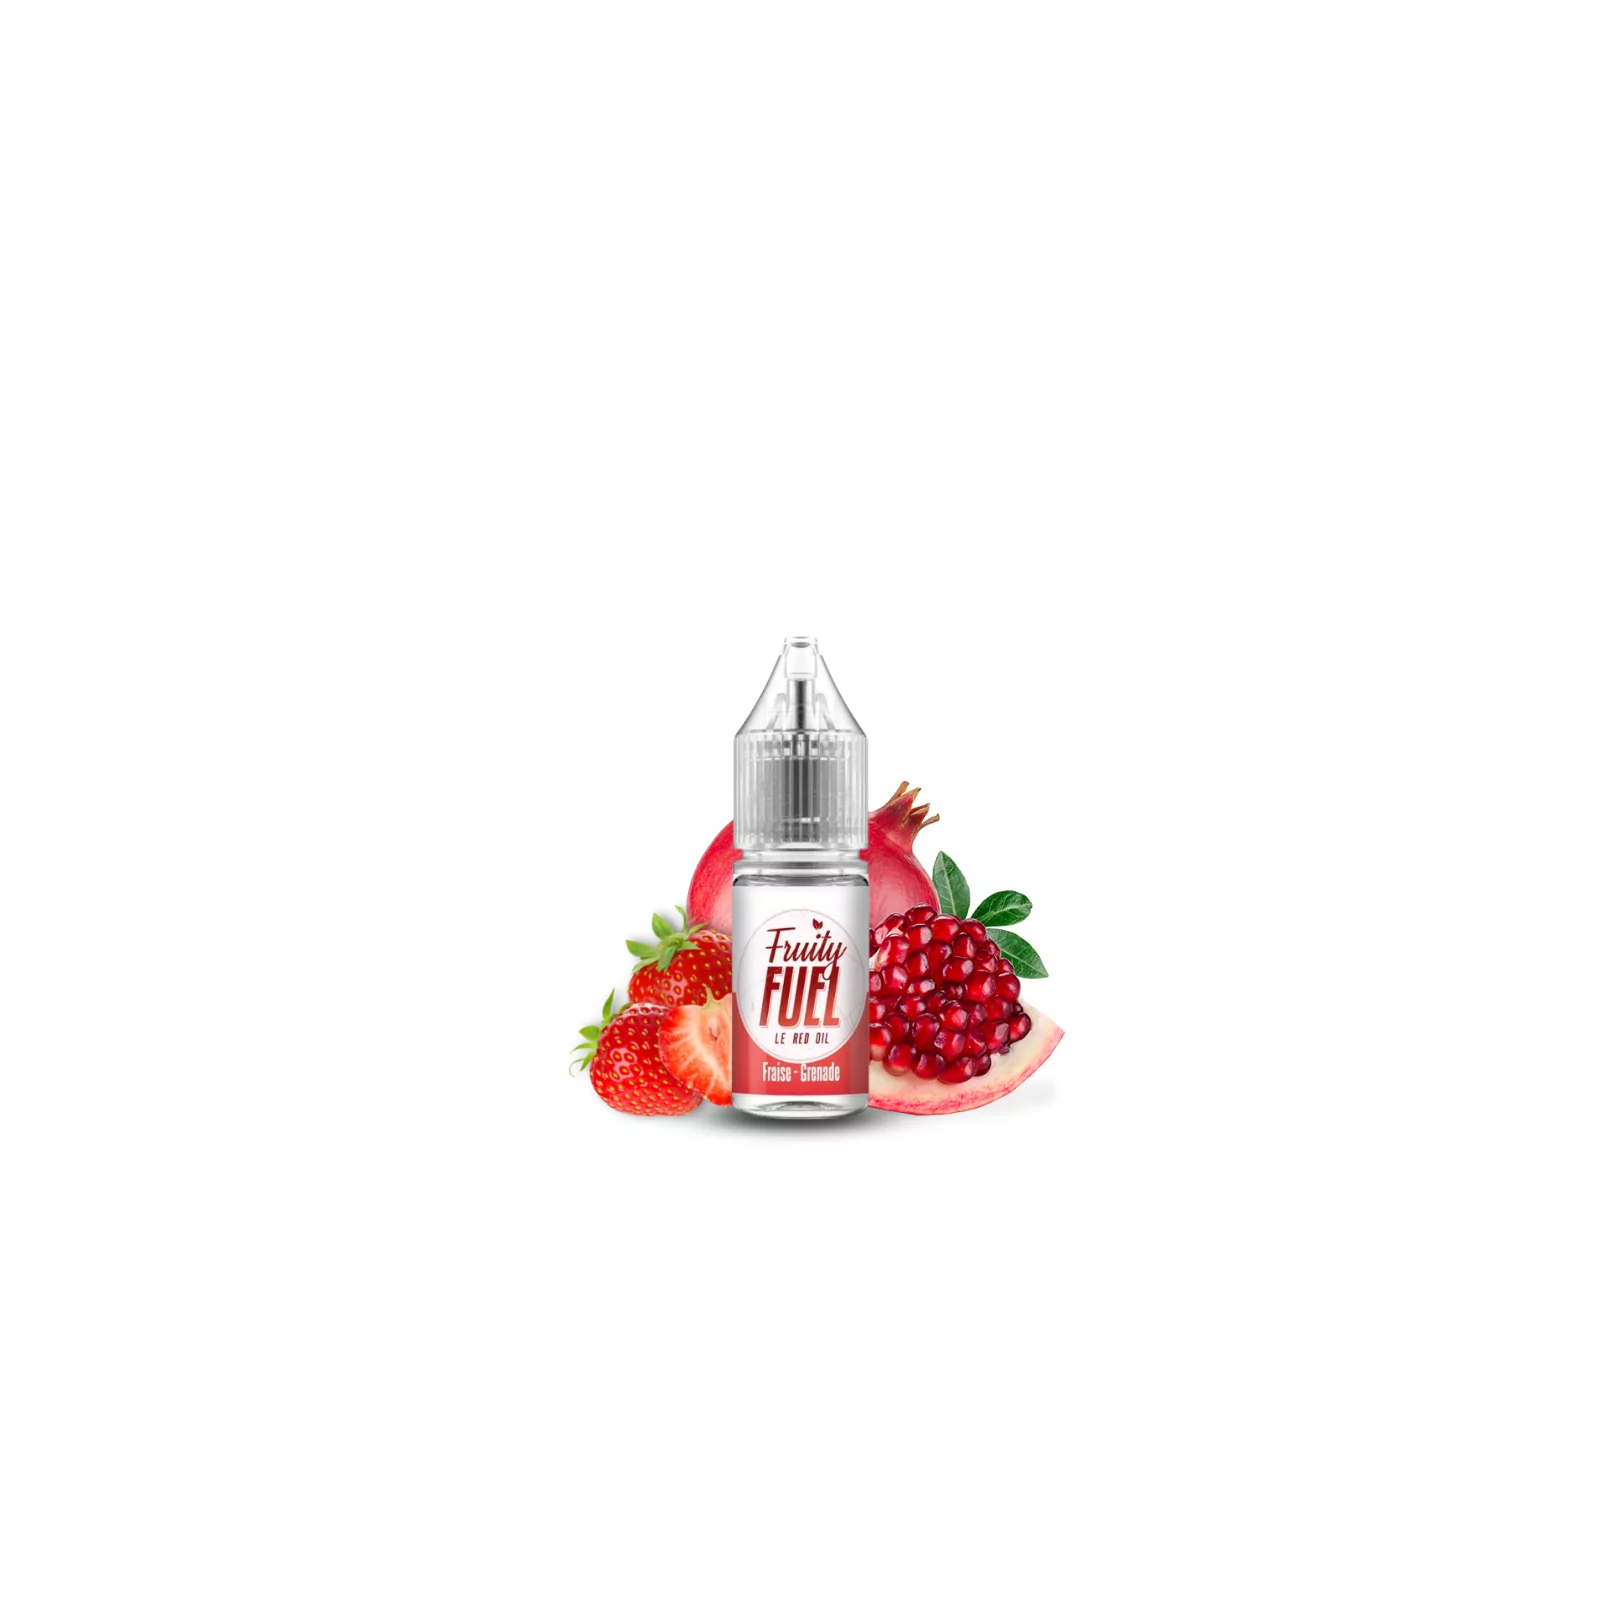 Le Red Oil 10ml - Fruity Fuel